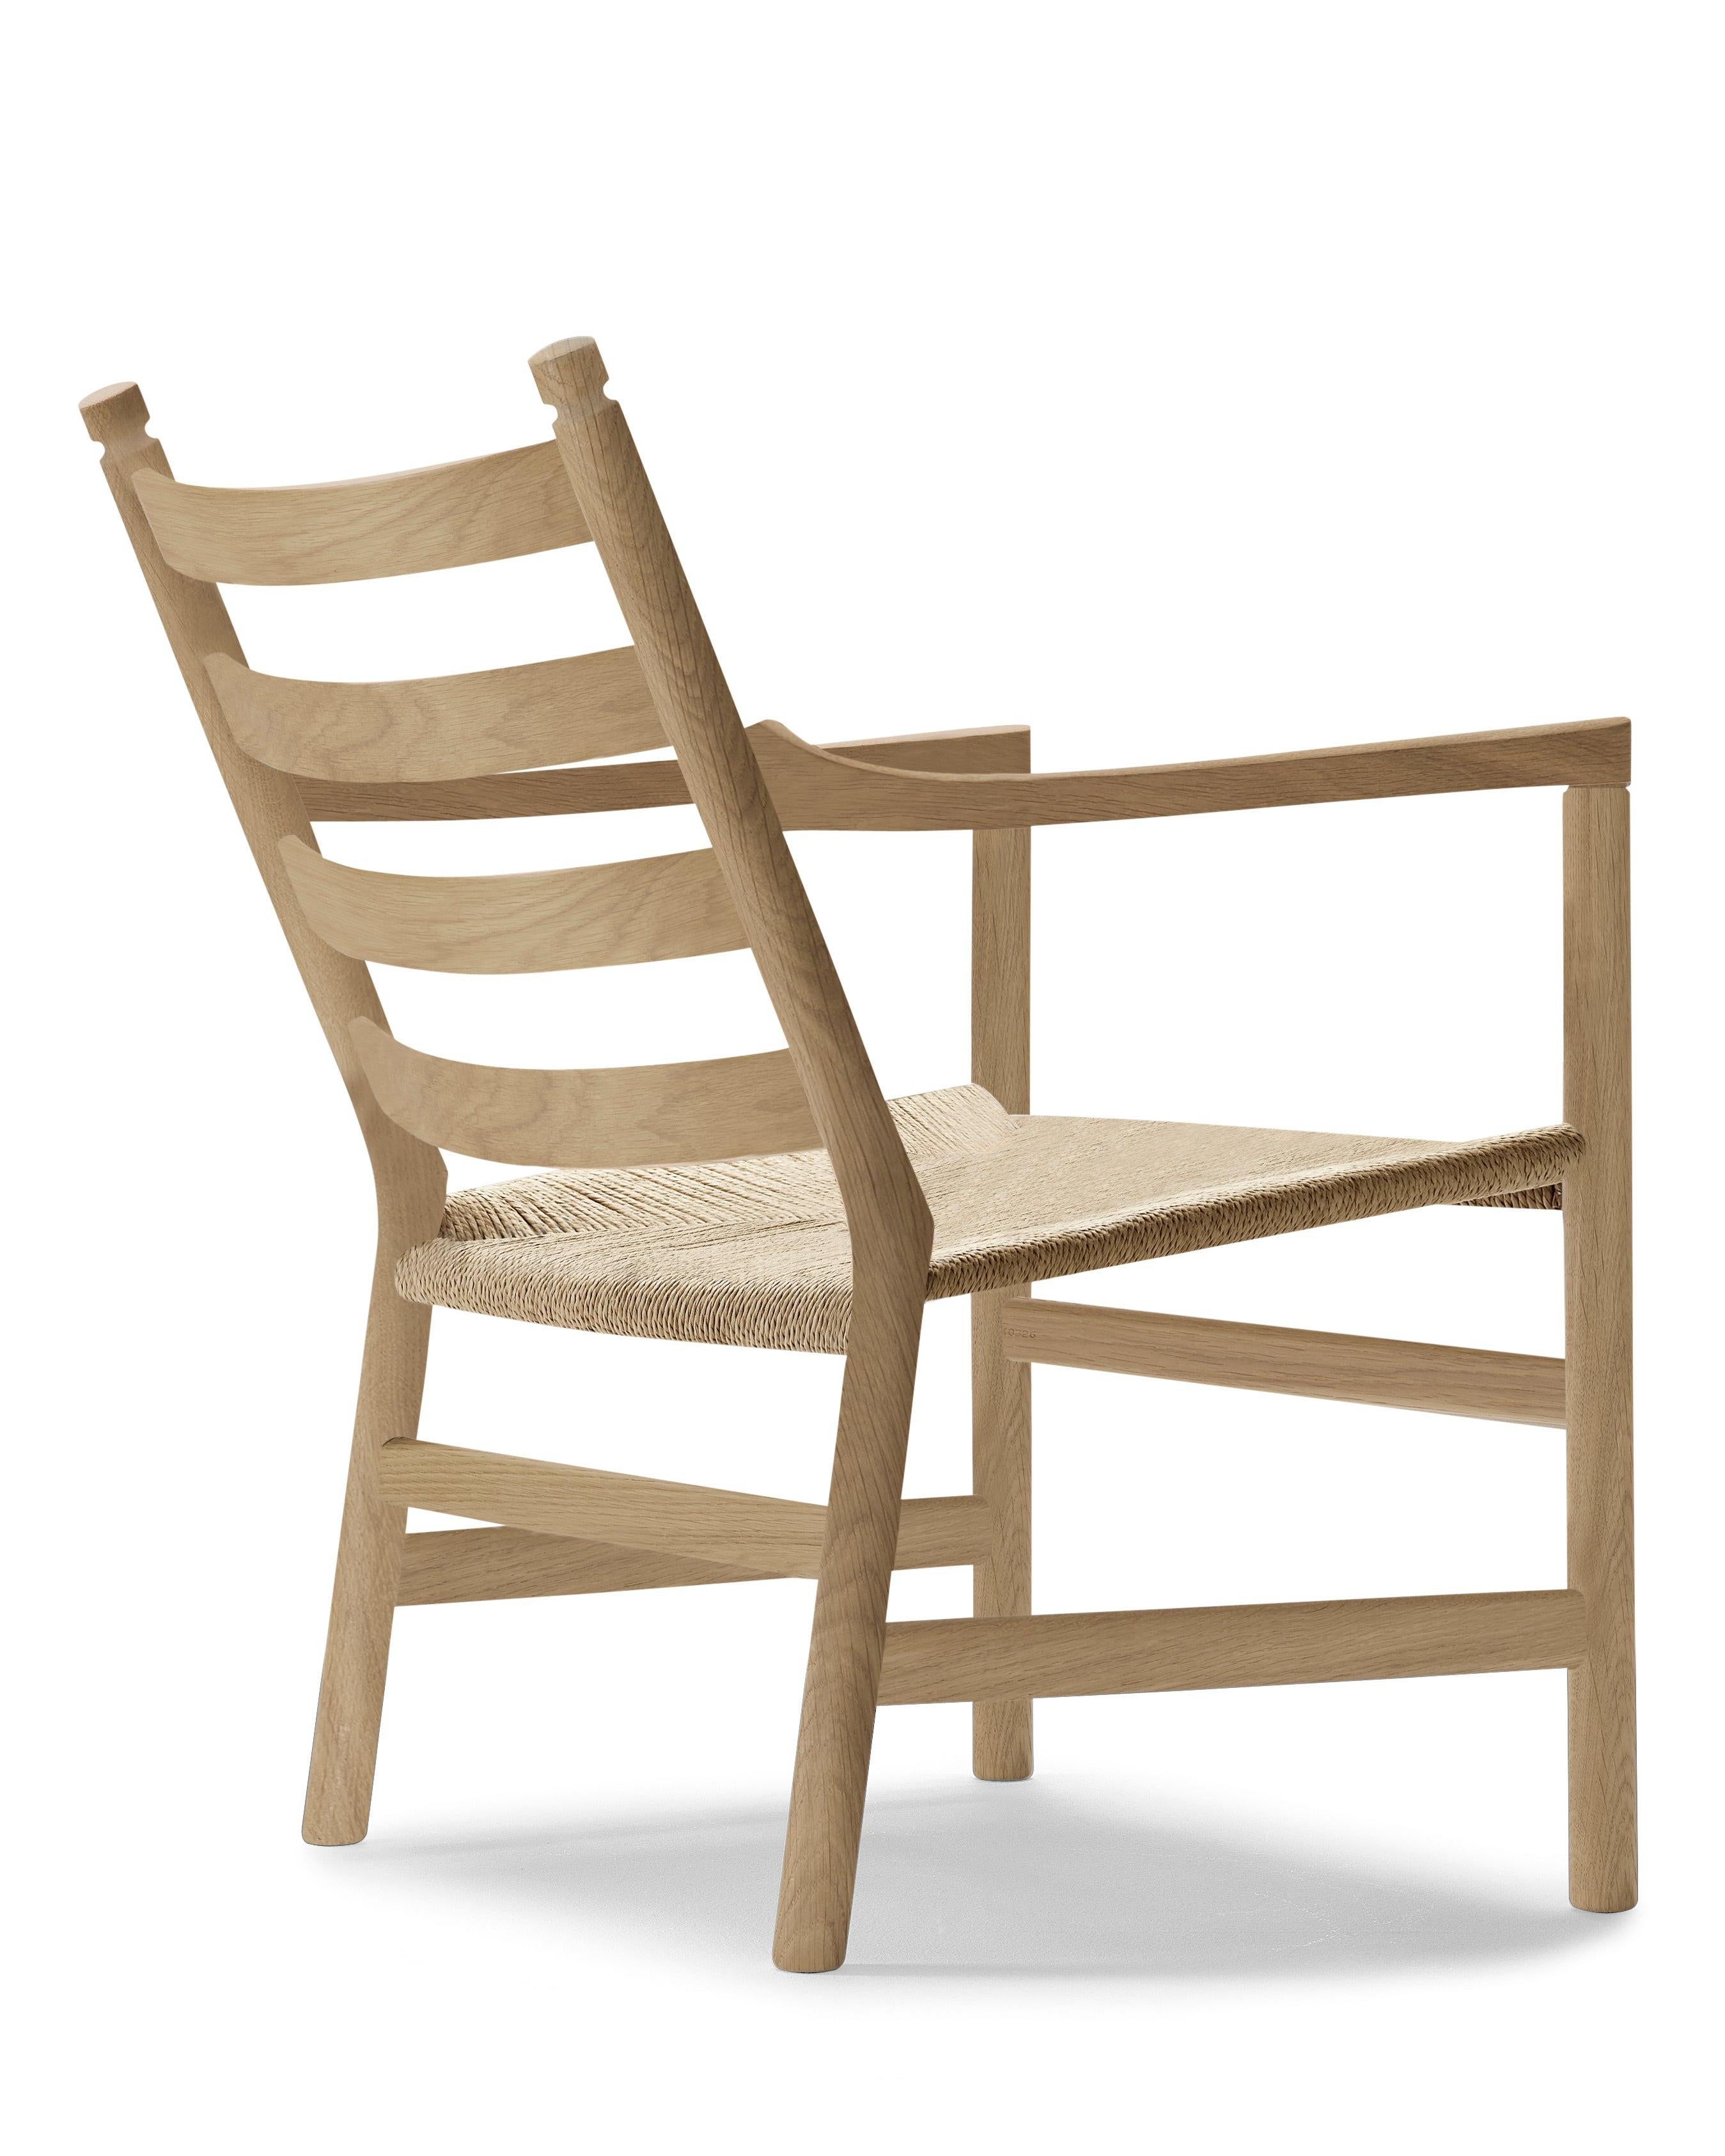 Modern CH44 Lounge Chair in Oak Soap with Natural Papercord Seat by Hans J. Wegner